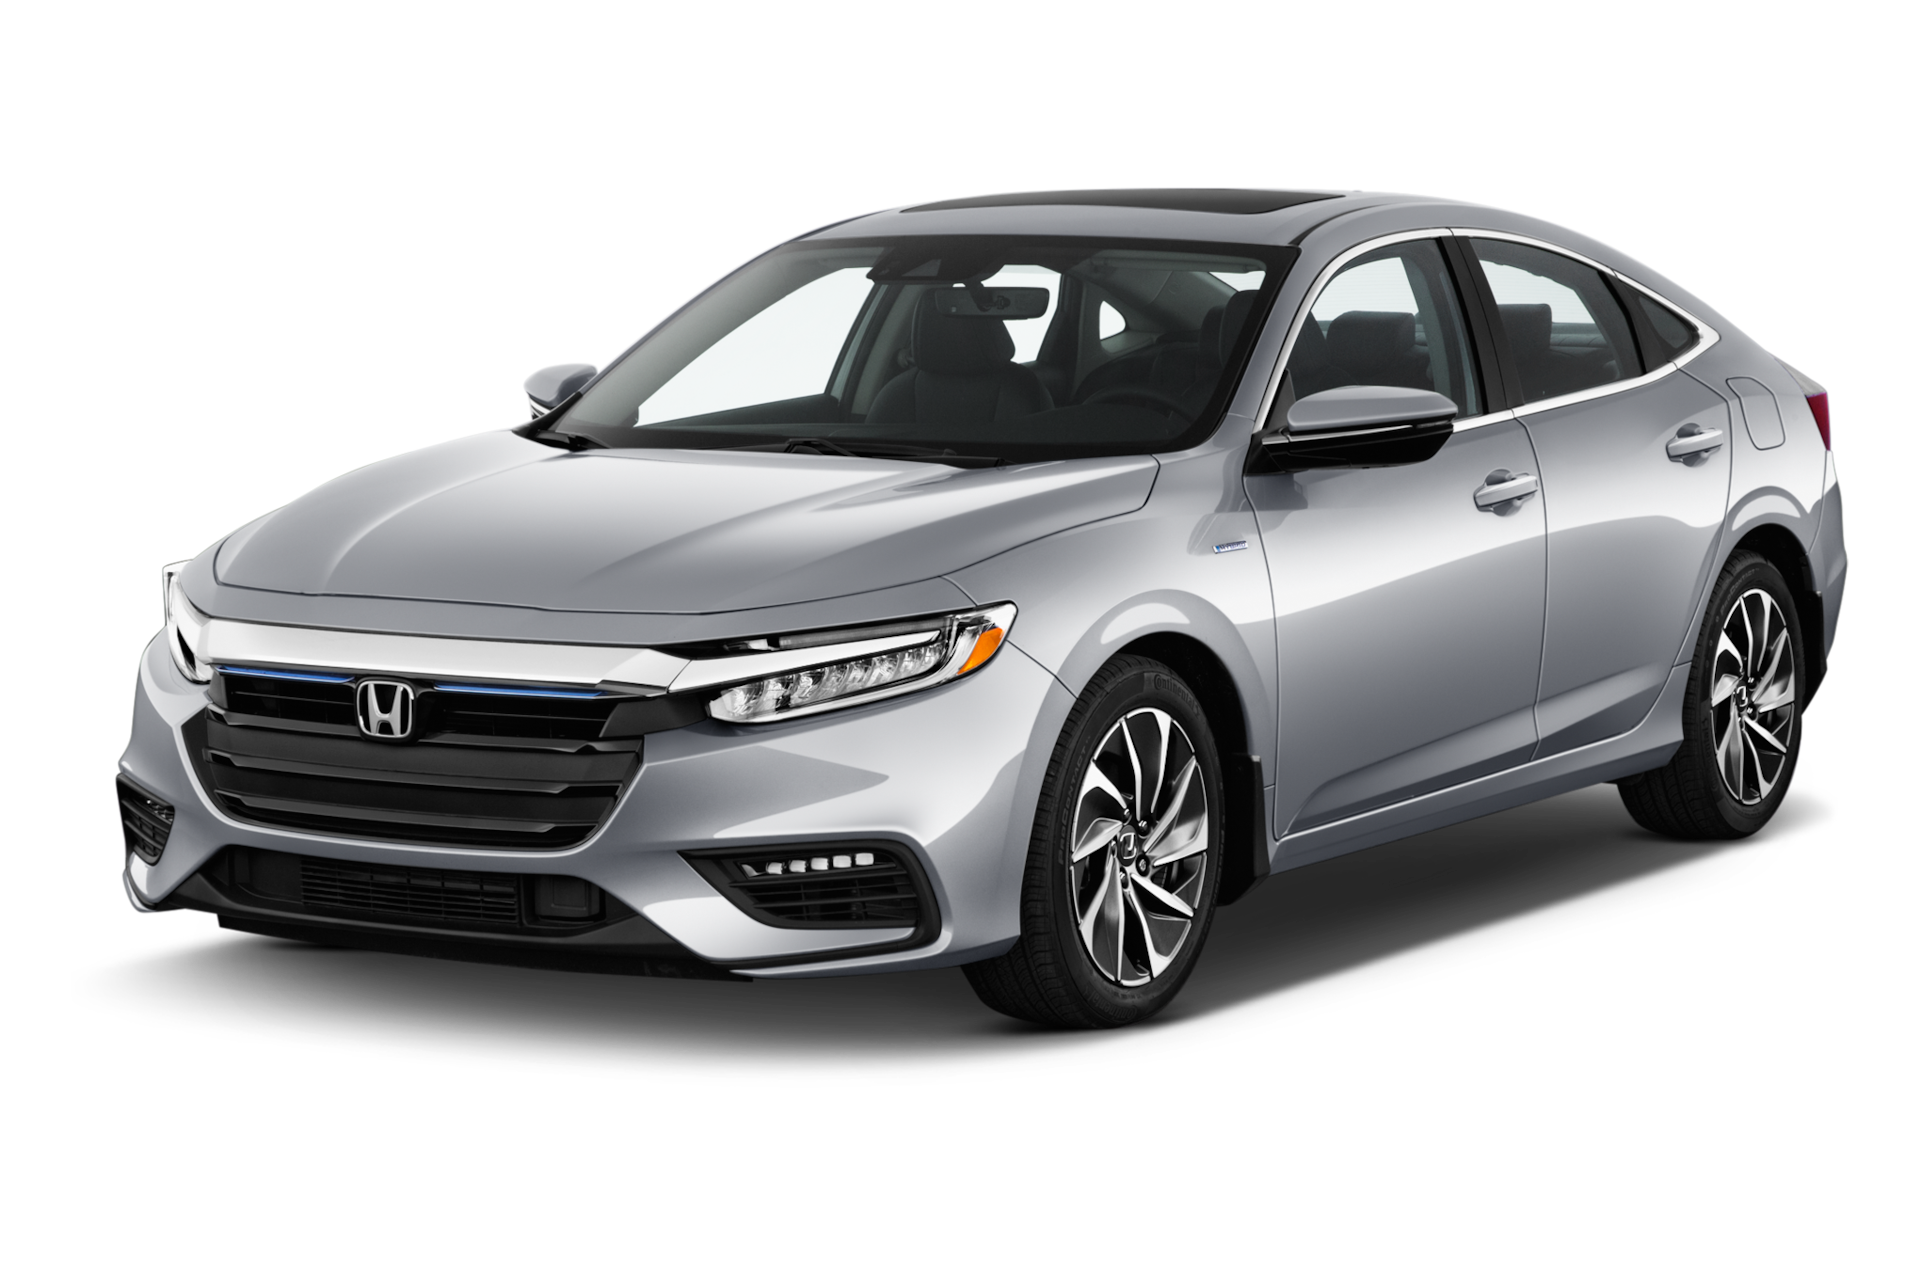 2022 Honda Insight Prices, Reviews, and Photos - MotorTrend